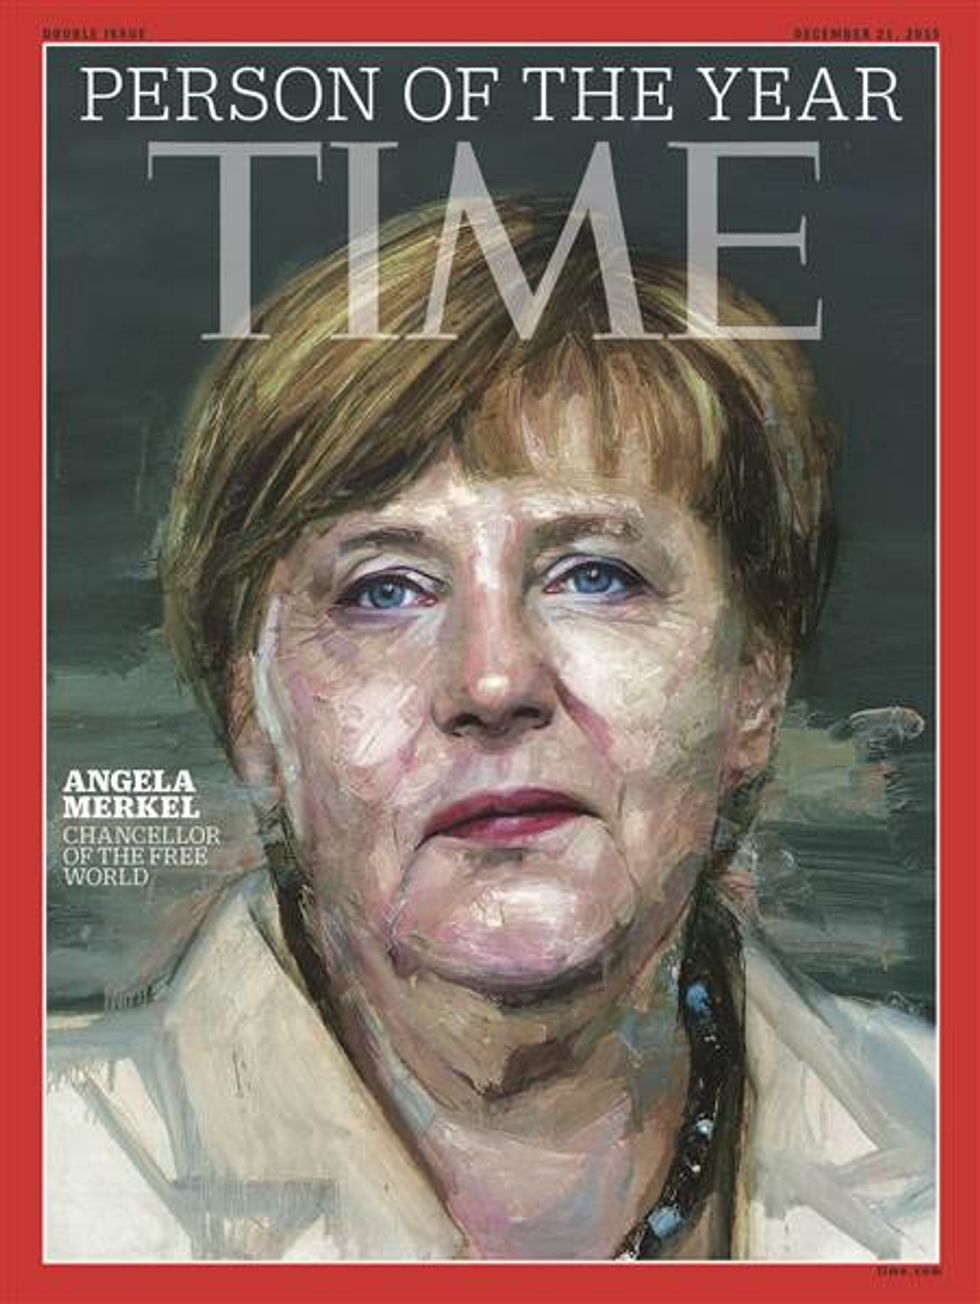 Time's 'Person of the Year' Is German Chancellor Angela Merkel 